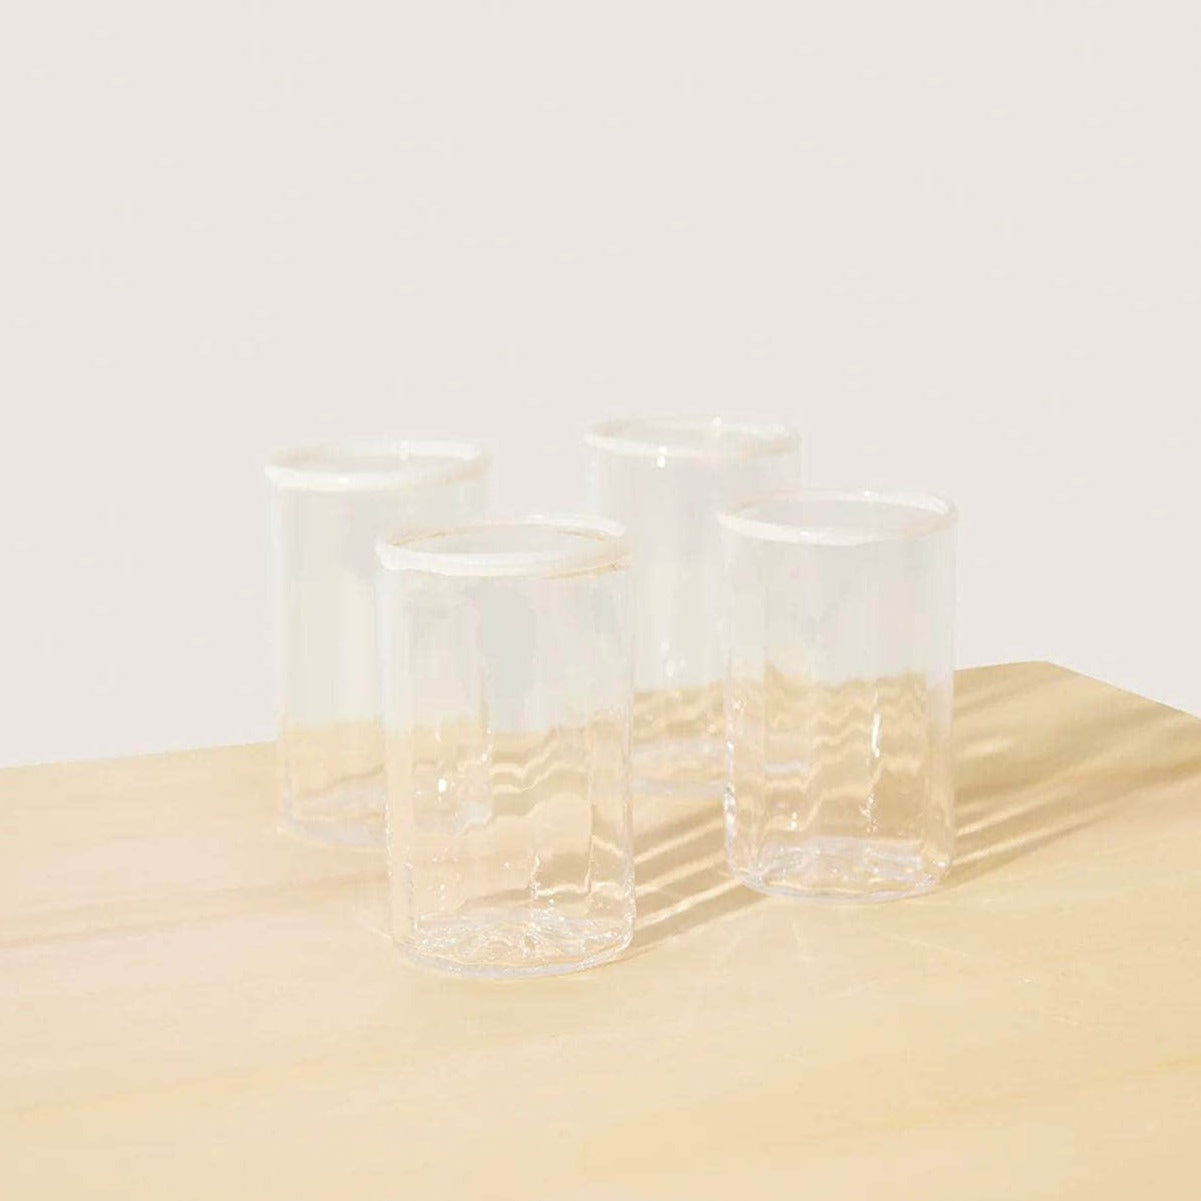 Peter Glass White Small - Set of Four